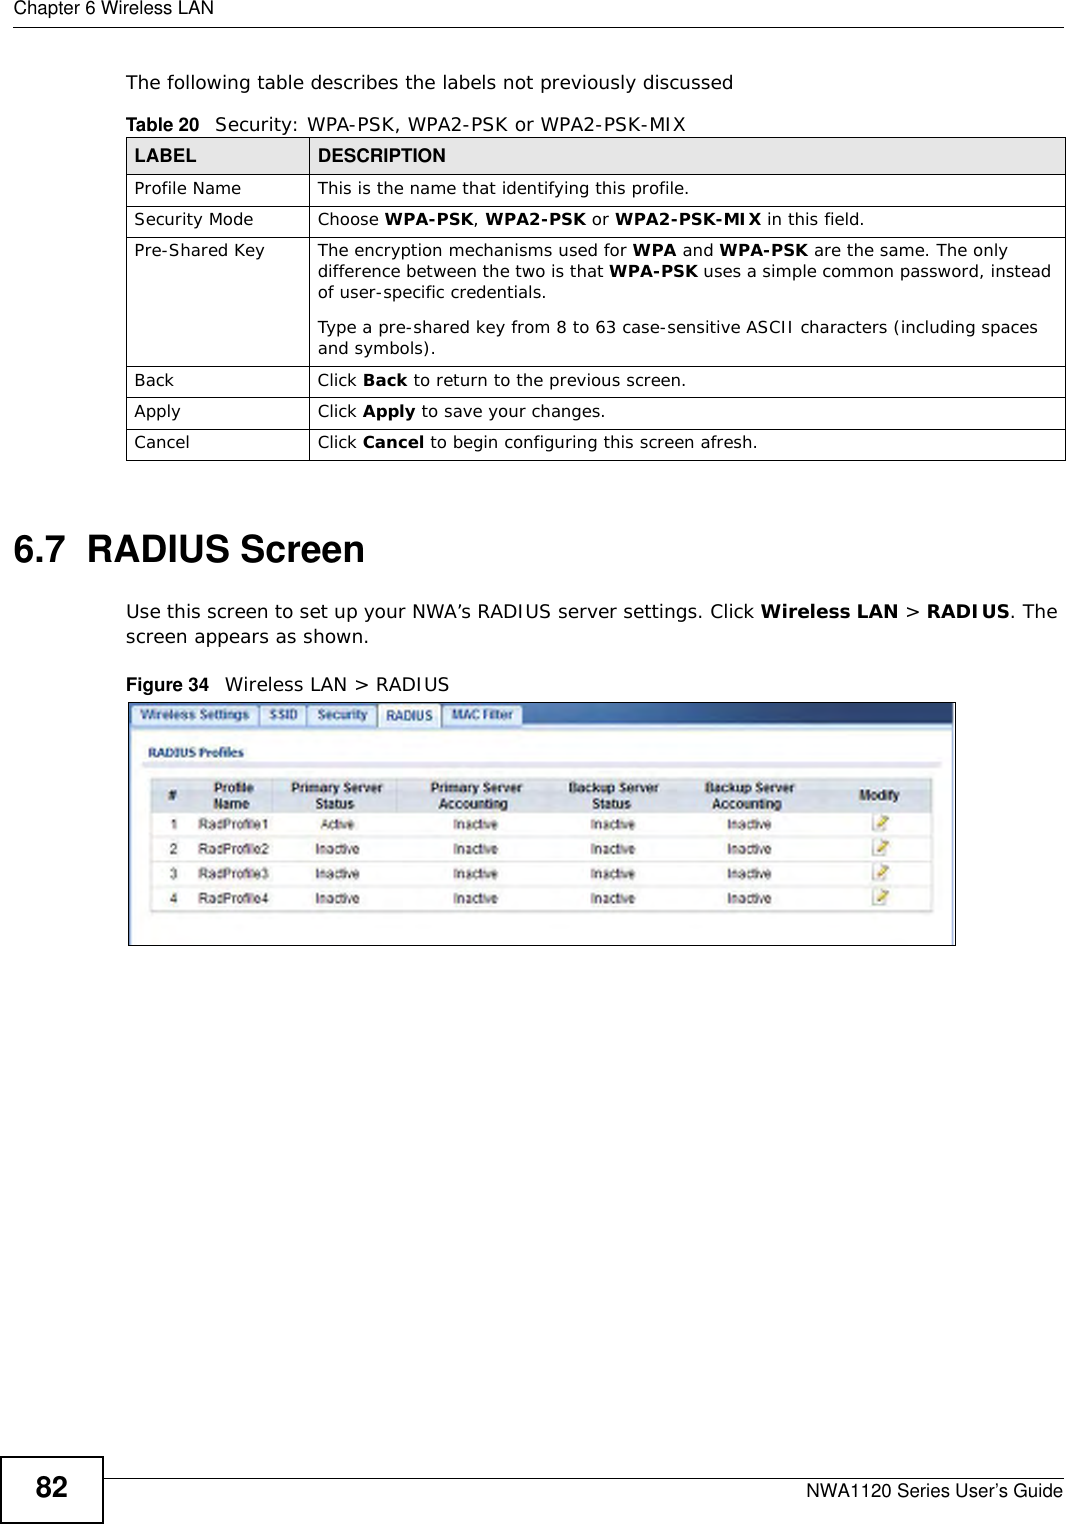 Chapter 6 Wireless LANNWA1120 Series User’s Guide82The following table describes the labels not previously discussed6.7  RADIUS ScreenUse this screen to set up your NWA’s RADIUS server settings. Click Wireless LAN &gt; RADIUS. The screen appears as shown. Figure 34   Wireless LAN &gt; RADIUSTable 20   Security: WPA-PSK, WPA2-PSK or WPA2-PSK-MIXLABEL DESCRIPTIONProfile Name This is the name that identifying this profile.Security Mode Choose WPA-PSK, WPA2-PSK or WPA2-PSK-MIX in this field.Pre-Shared Key The encryption mechanisms used for WPA and WPA-PSK are the same. The only difference between the two is that WPA-PSK uses a simple common password, instead of user-specific credentials.Type a pre-shared key from 8 to 63 case-sensitive ASCII characters (including spaces and symbols).Back Click Back to return to the previous screen.Apply Click Apply to save your changes.Cancel Click Cancel to begin configuring this screen afresh.